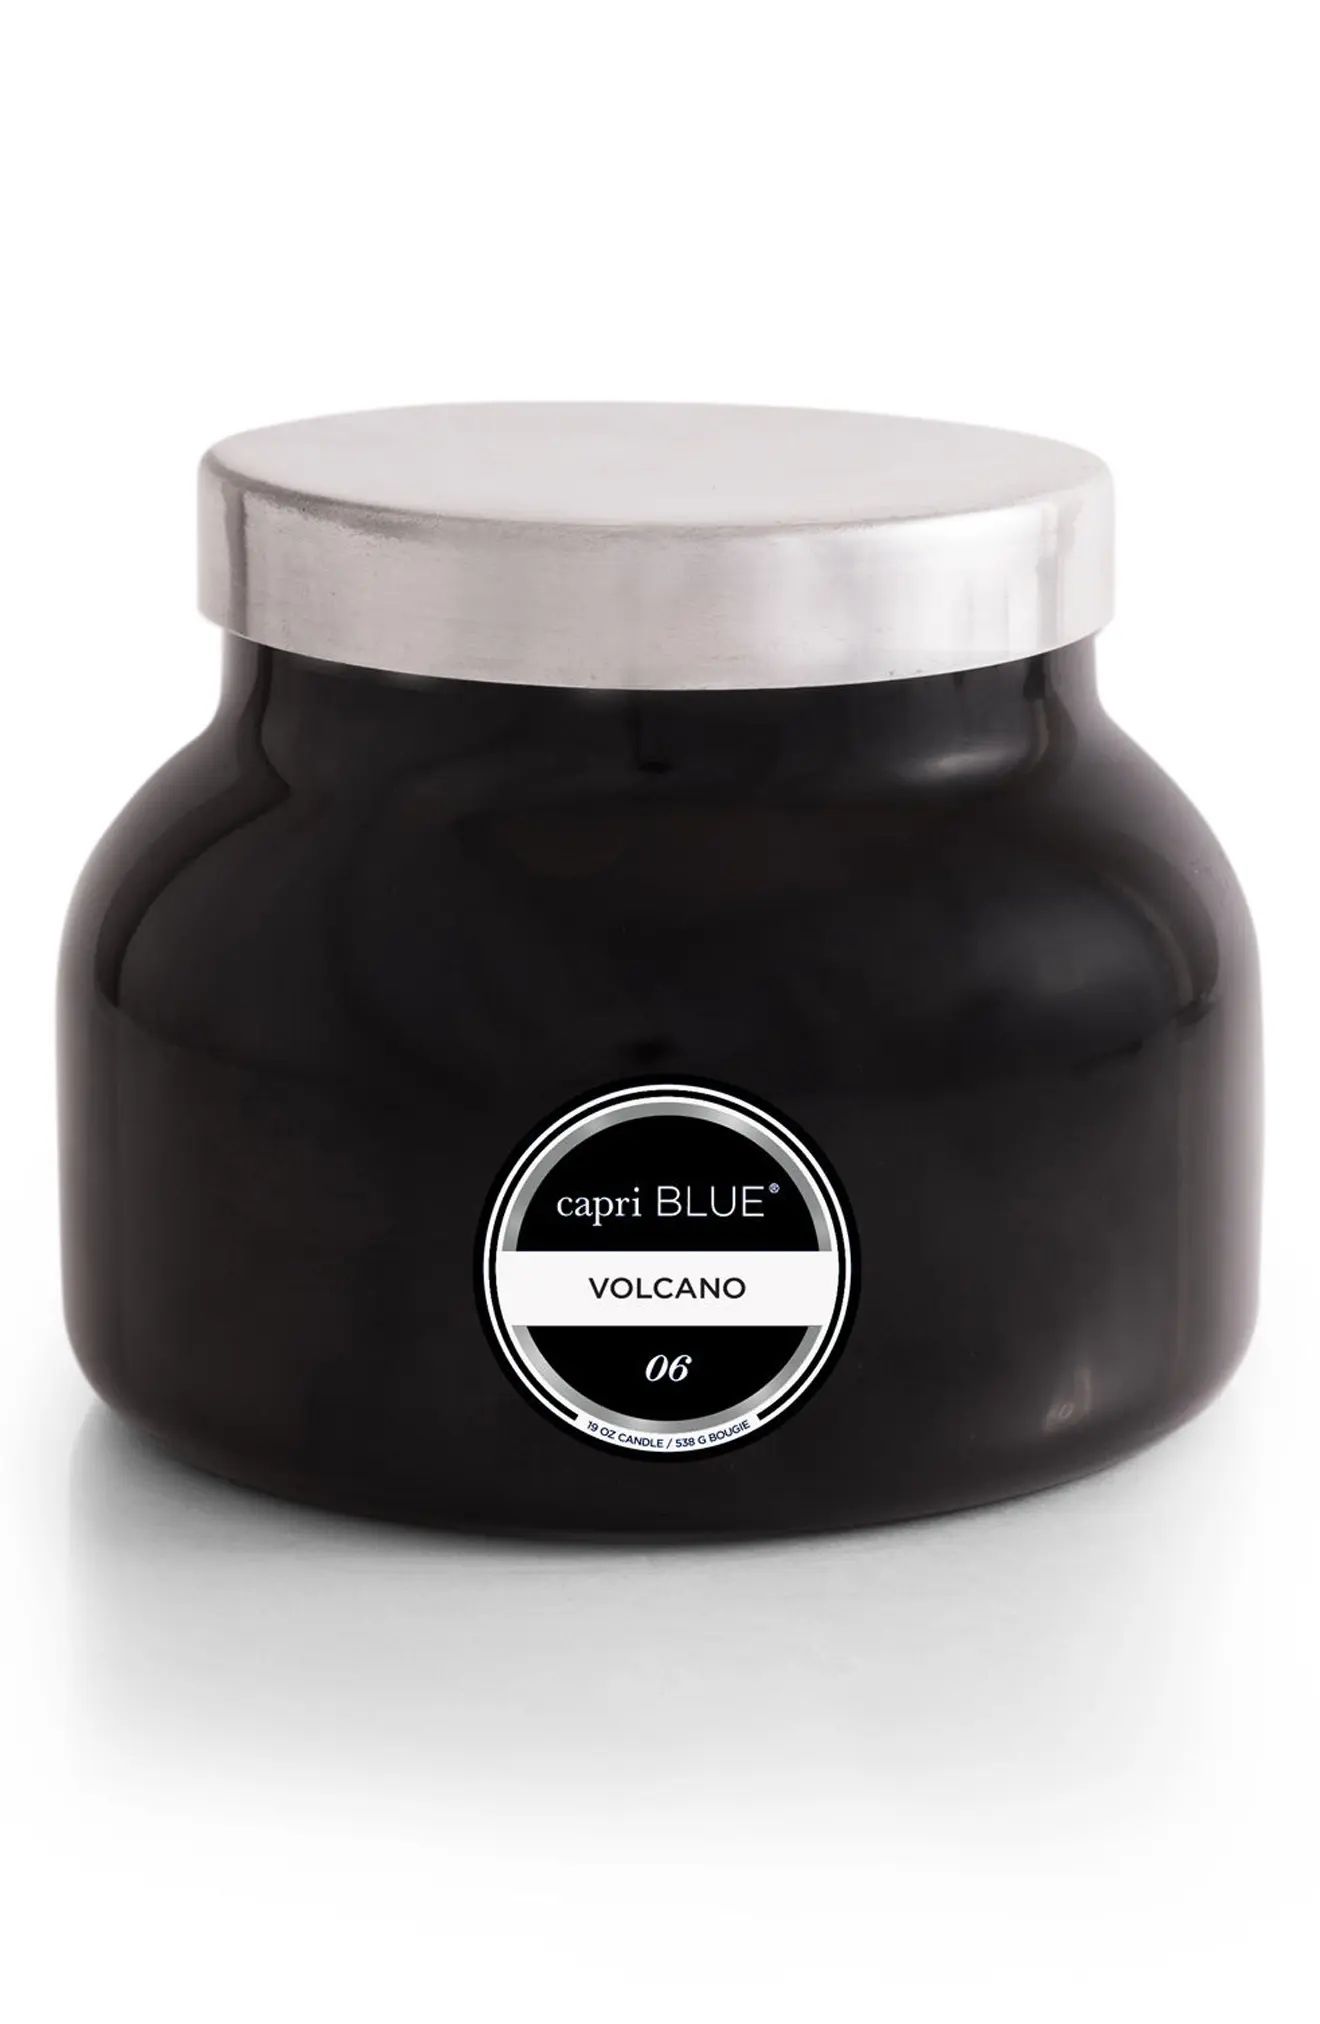 Signature Volcano Scented Jar Candle | Nordstrom